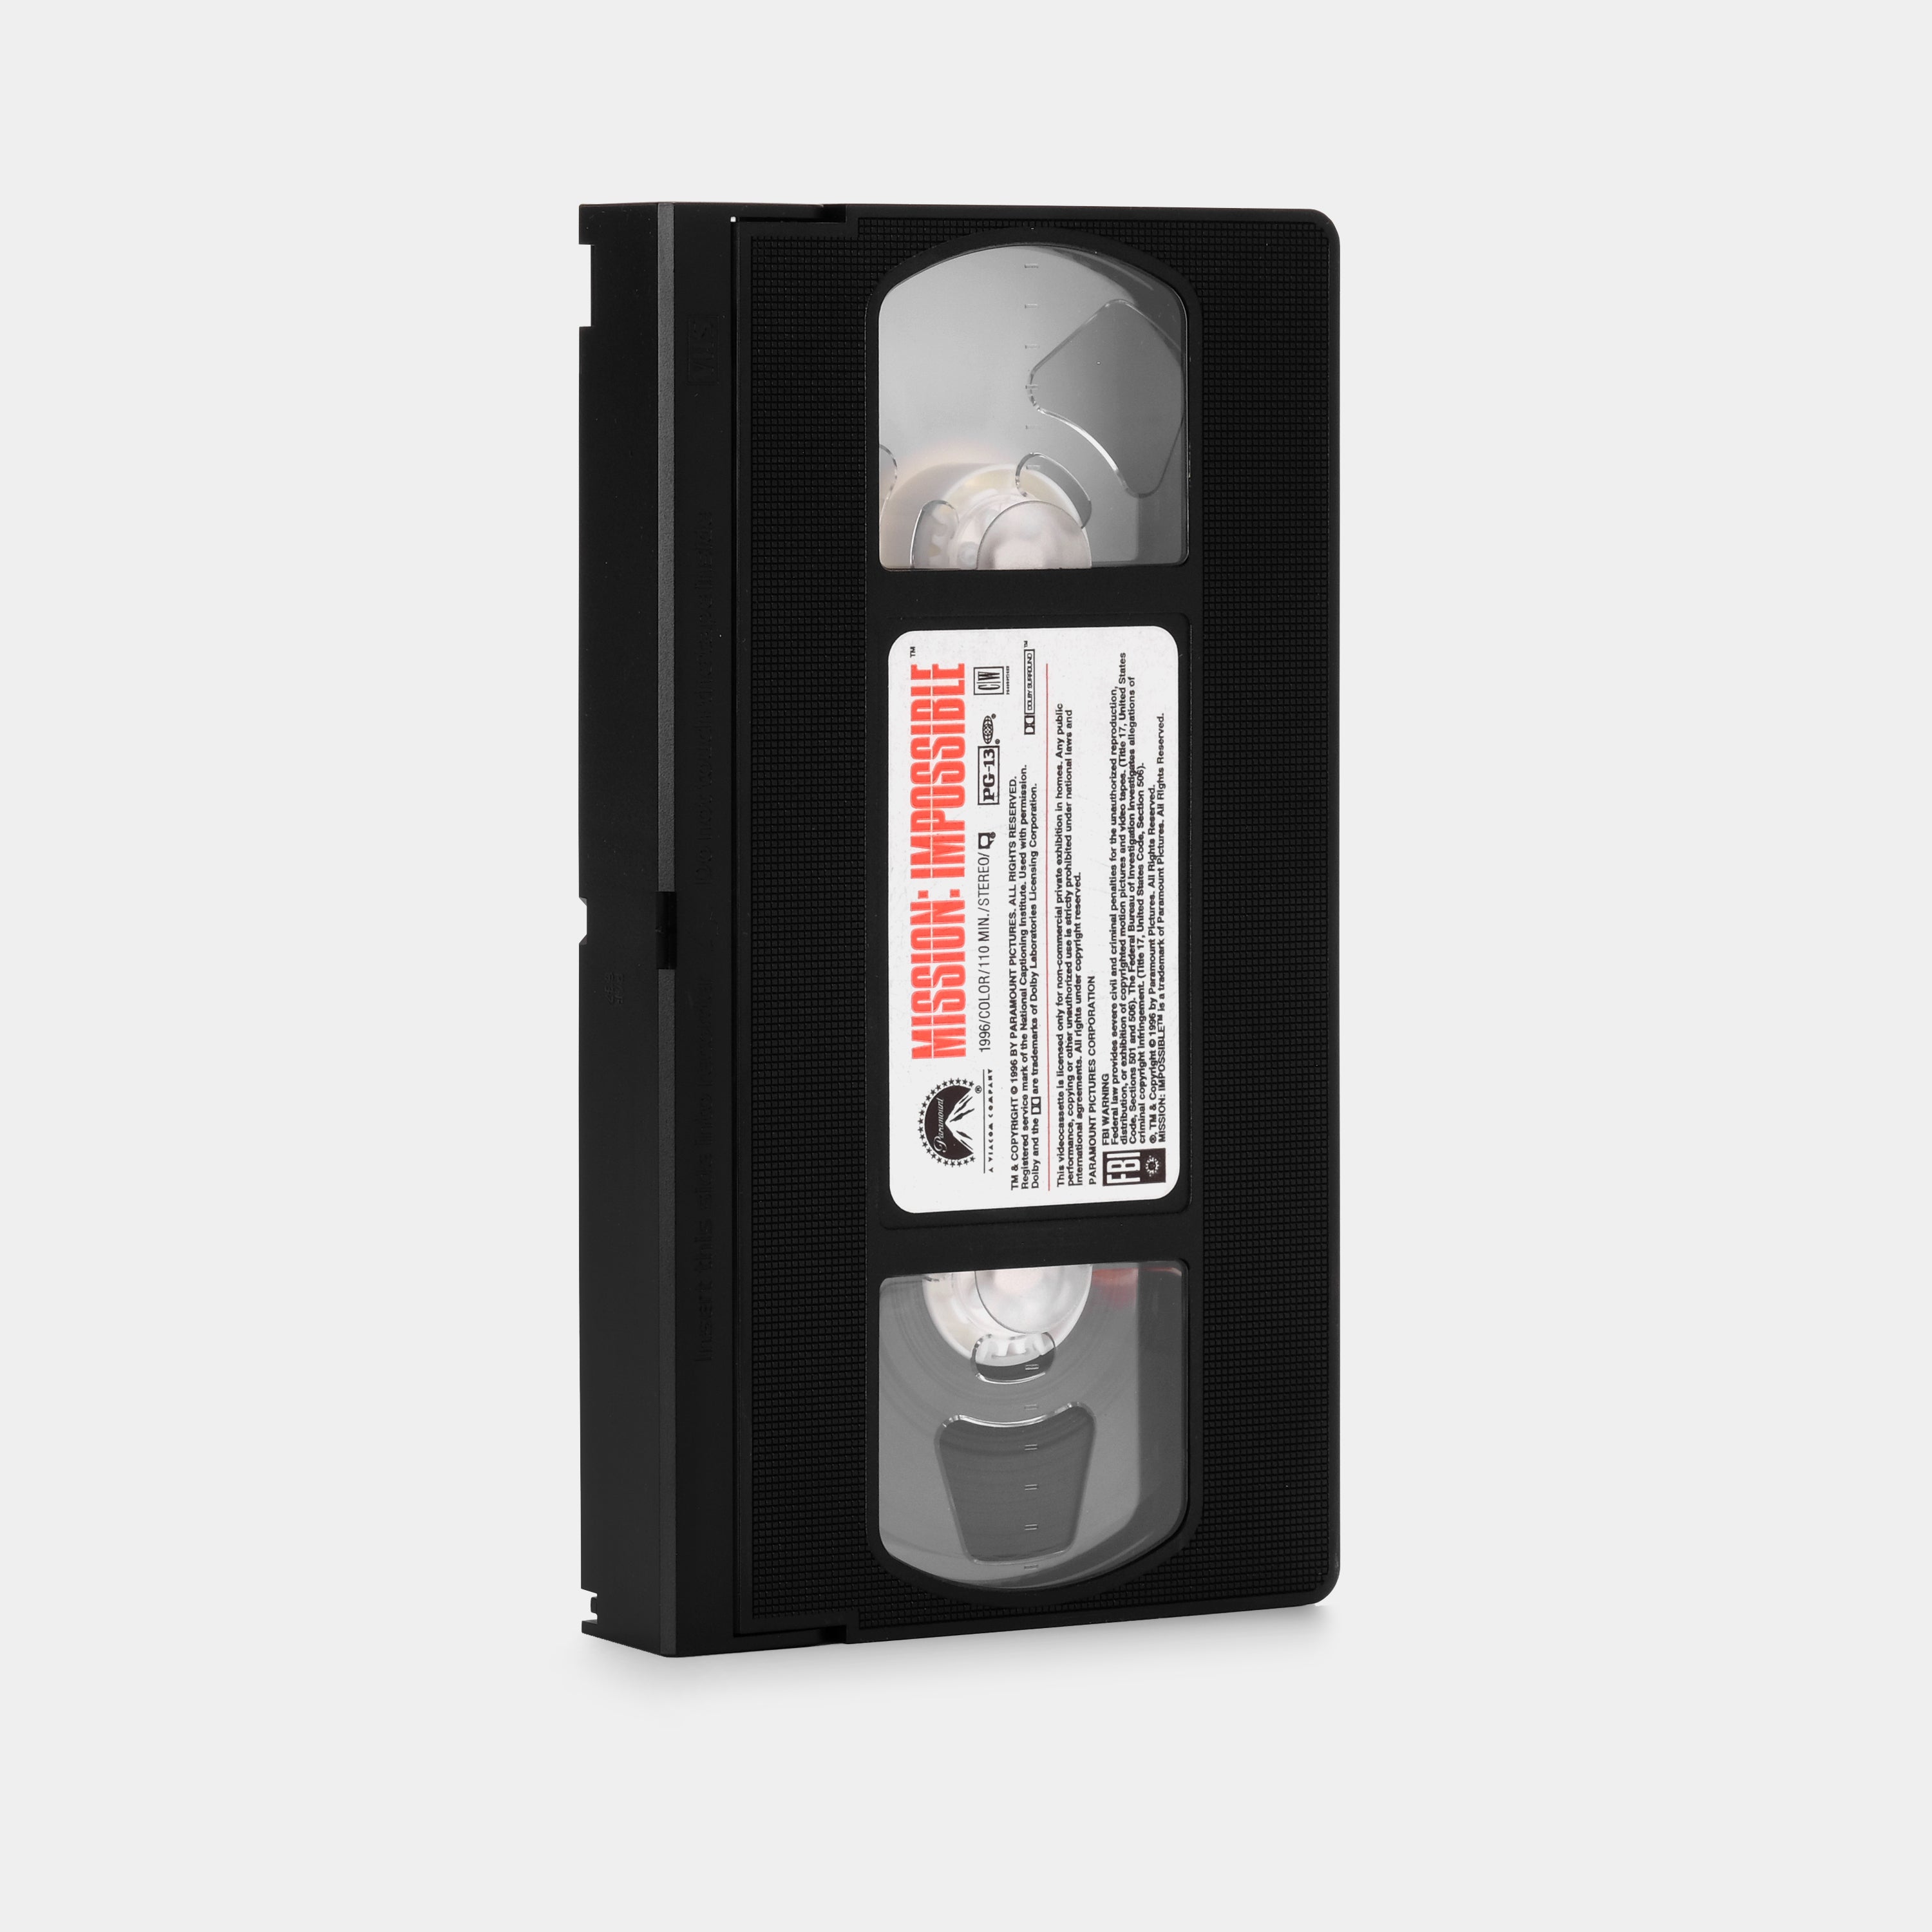 Mission: Impossible VHS Tape